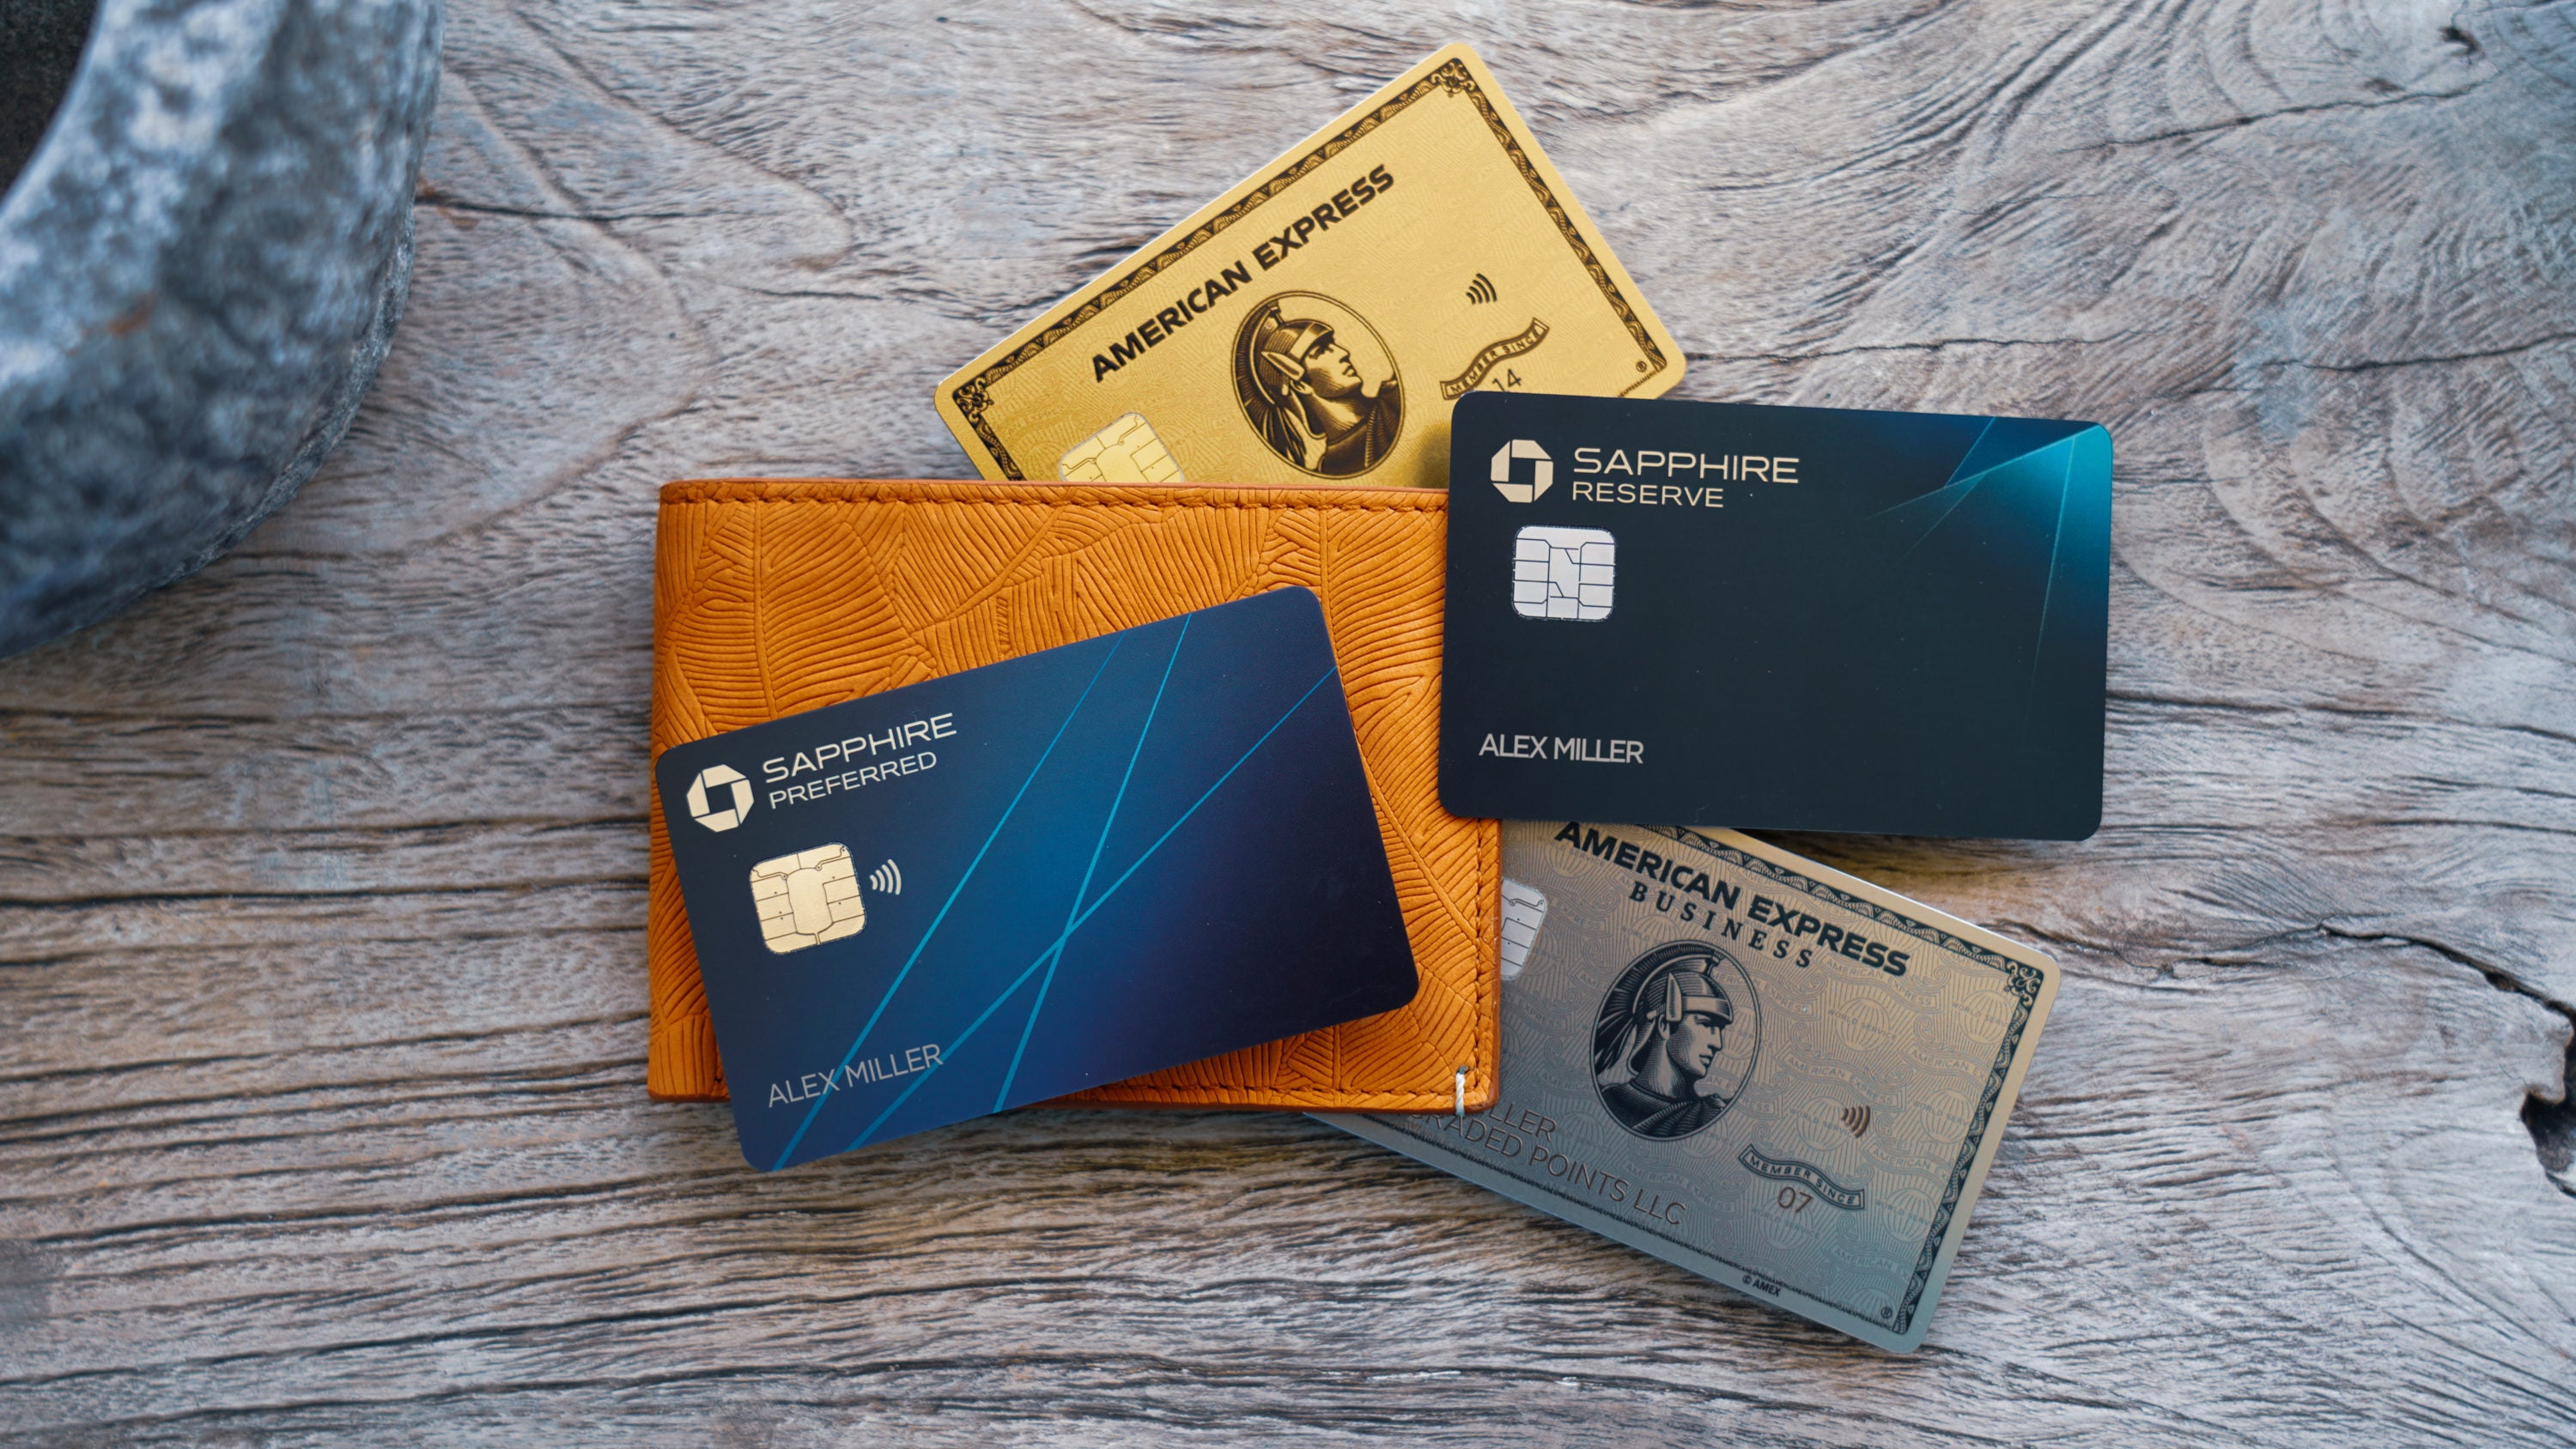 Amex Credit Cards and Chase Credit Cards Upgraded Points LLC Large